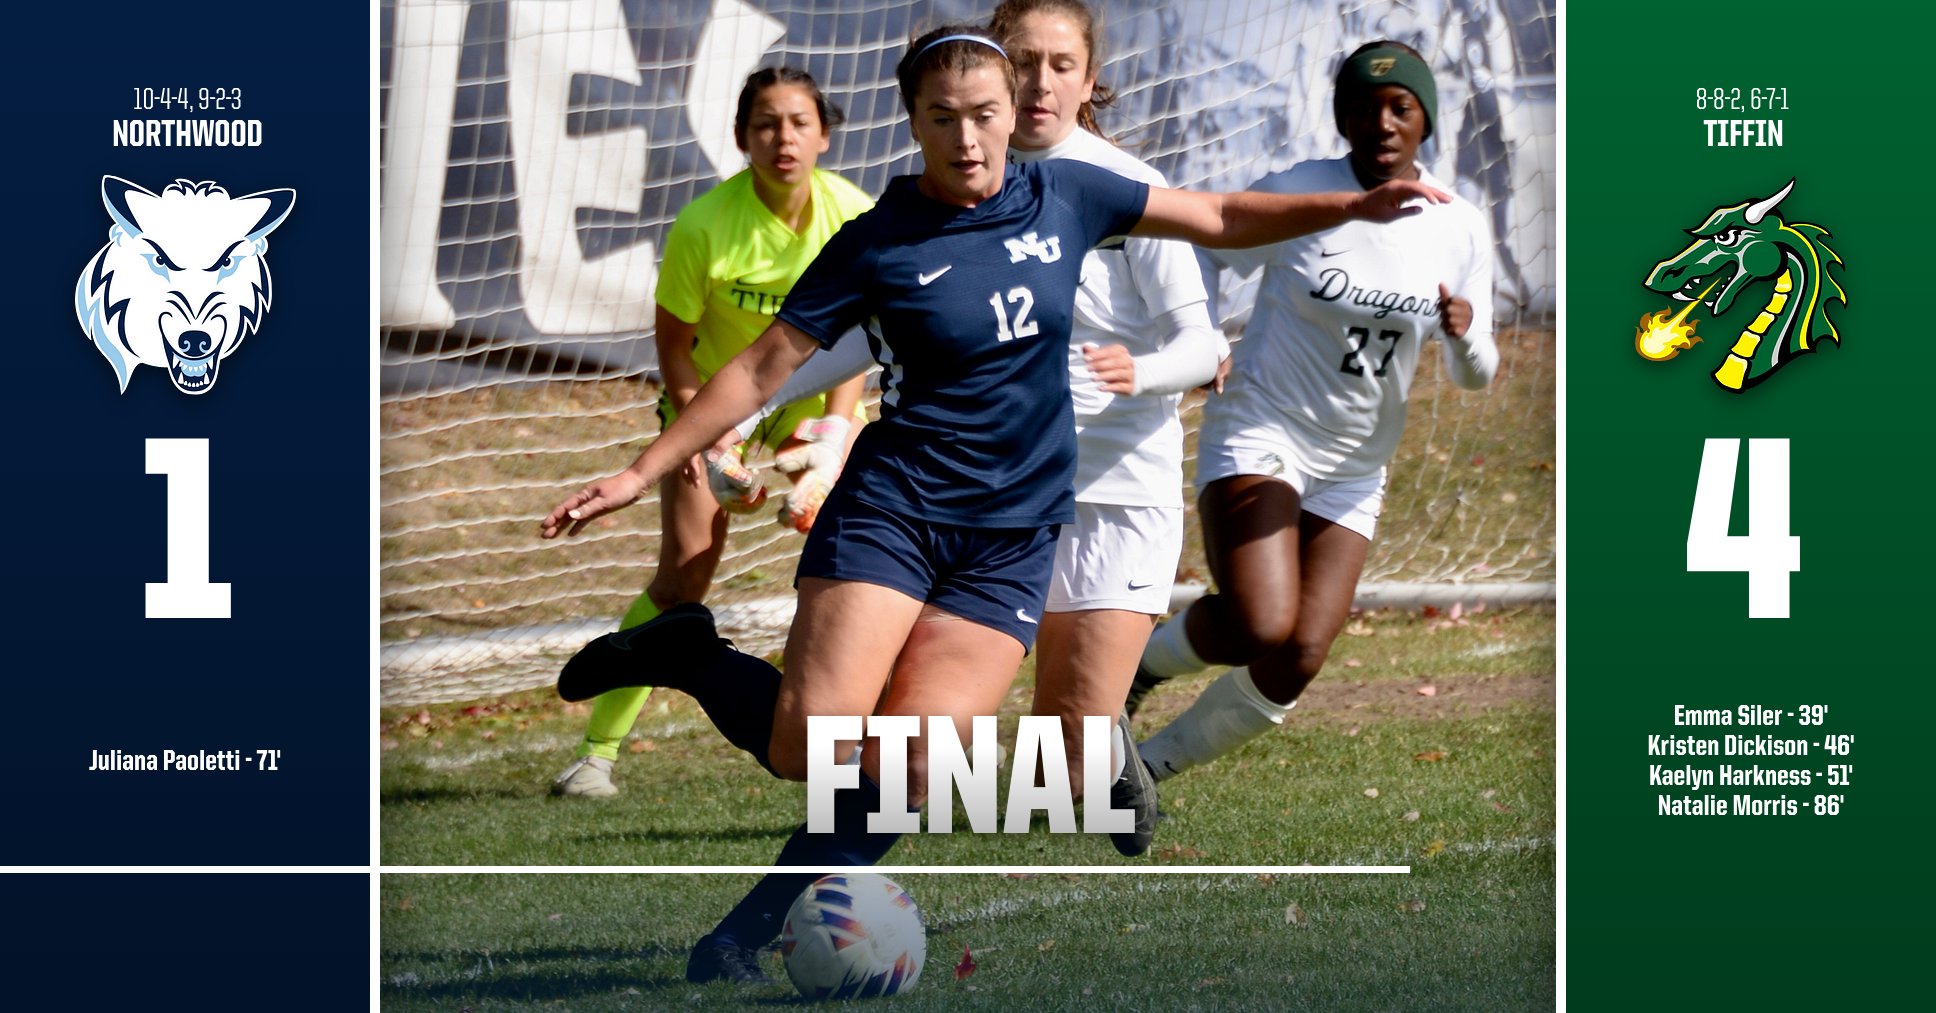 Women's Soccer Faces Hiccup As They Fall At Tiffin, 4-1